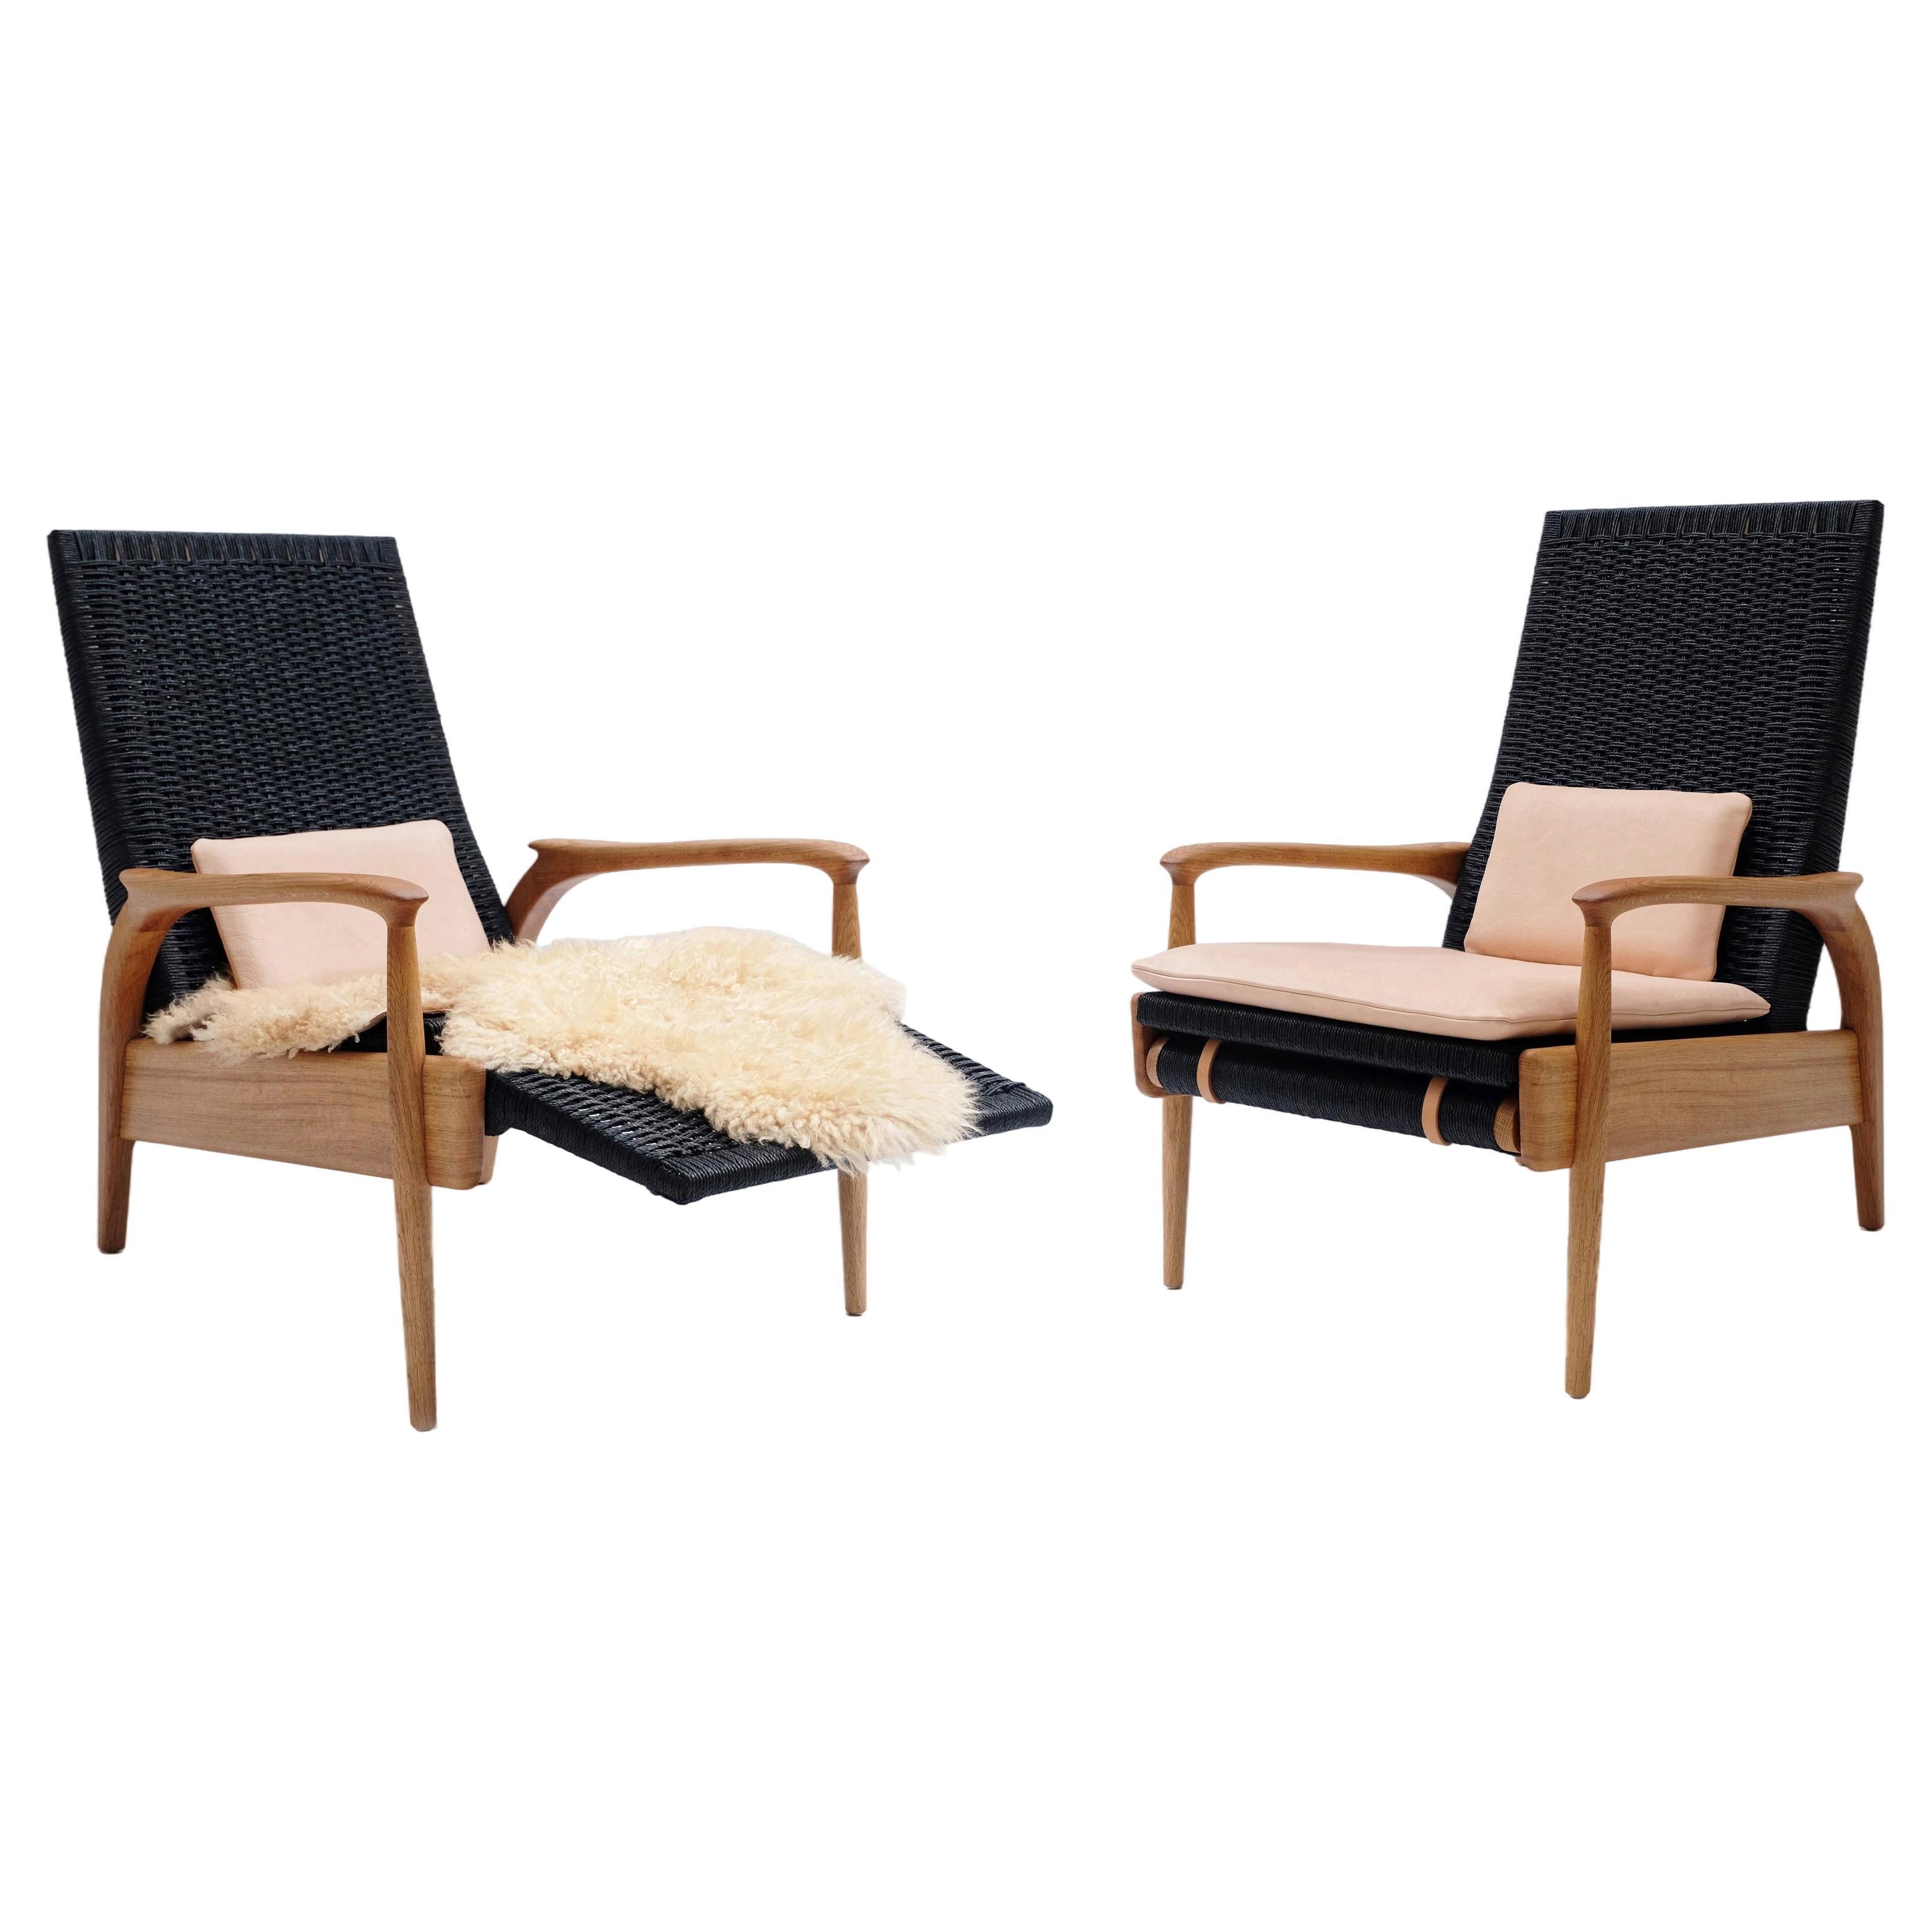 Pair of Reclining Armchairs, Solid Oak, Black Danish Cord, Leather Cushions For Sale